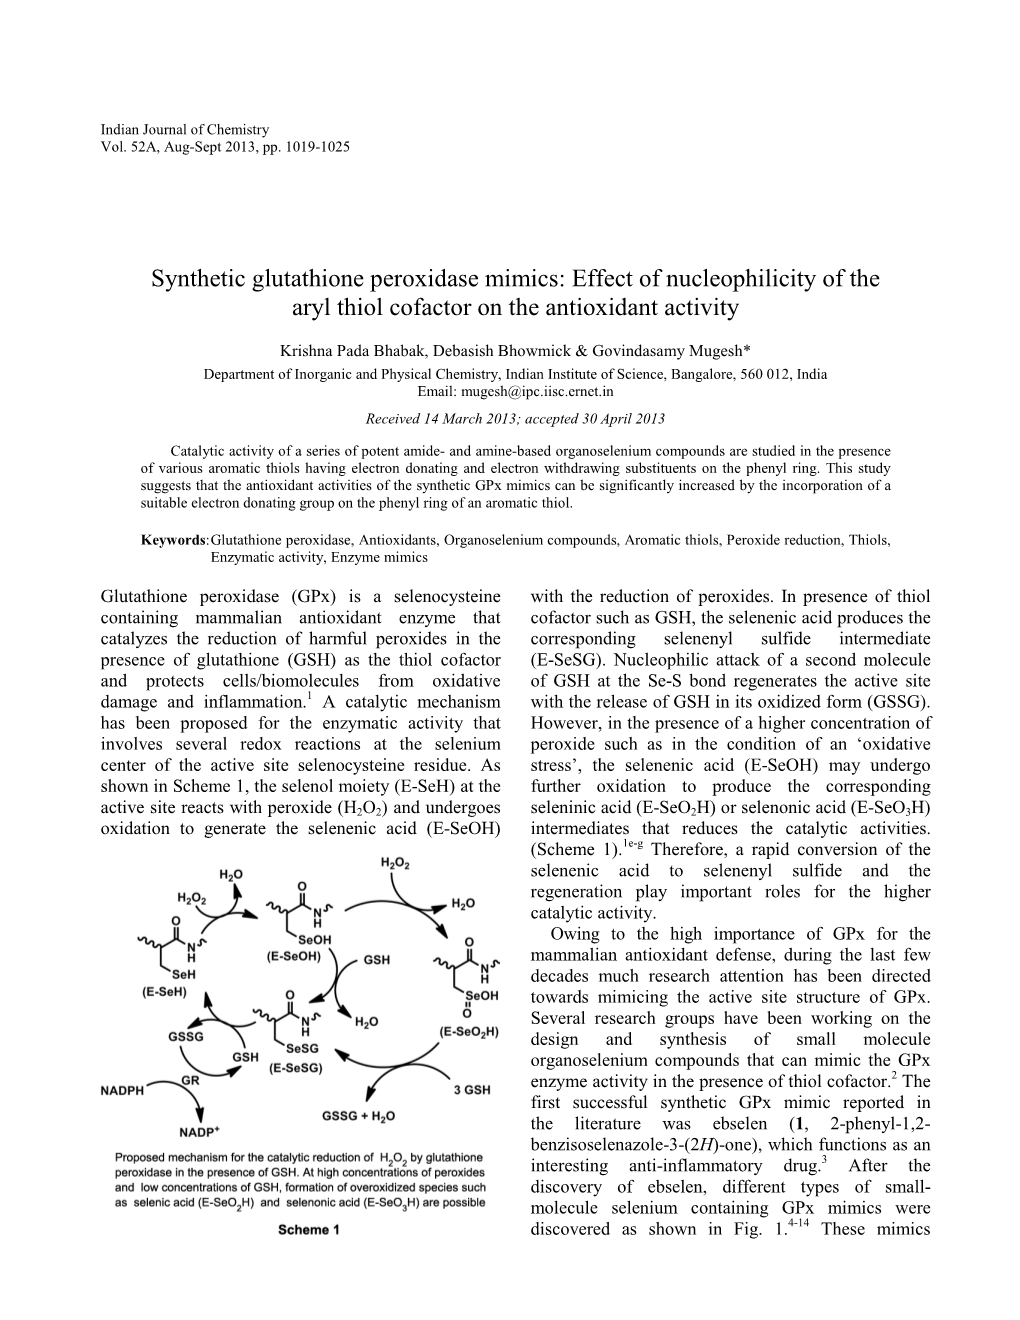 Effect of Nucleophilicity of the Aryl Thiol Cofactor on the Antioxidant Activity